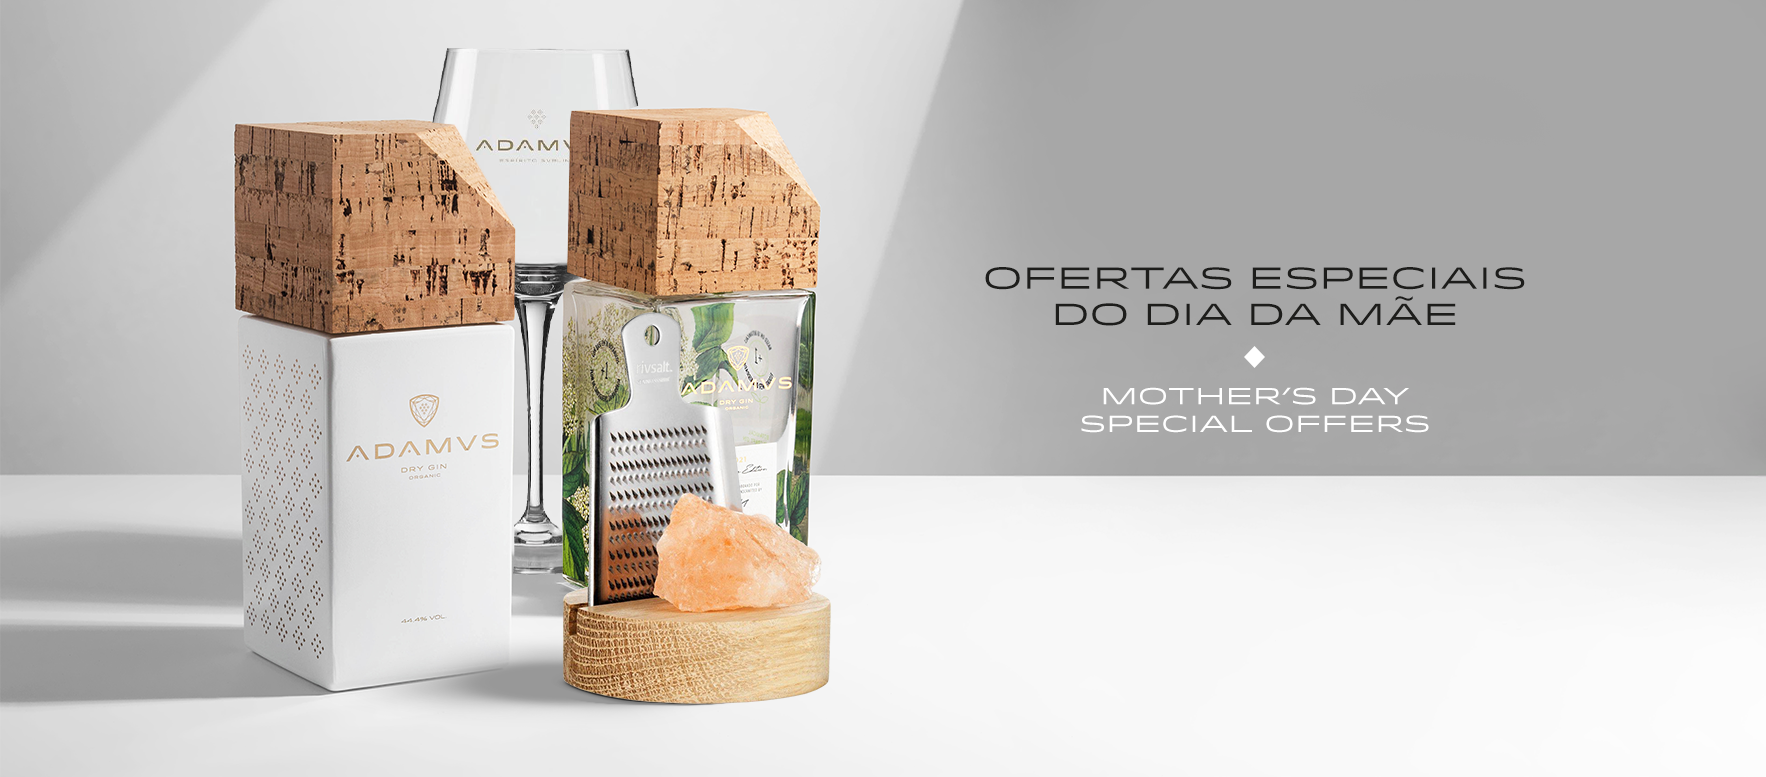 Adamus Mother's Day Special Offers and Suggestions